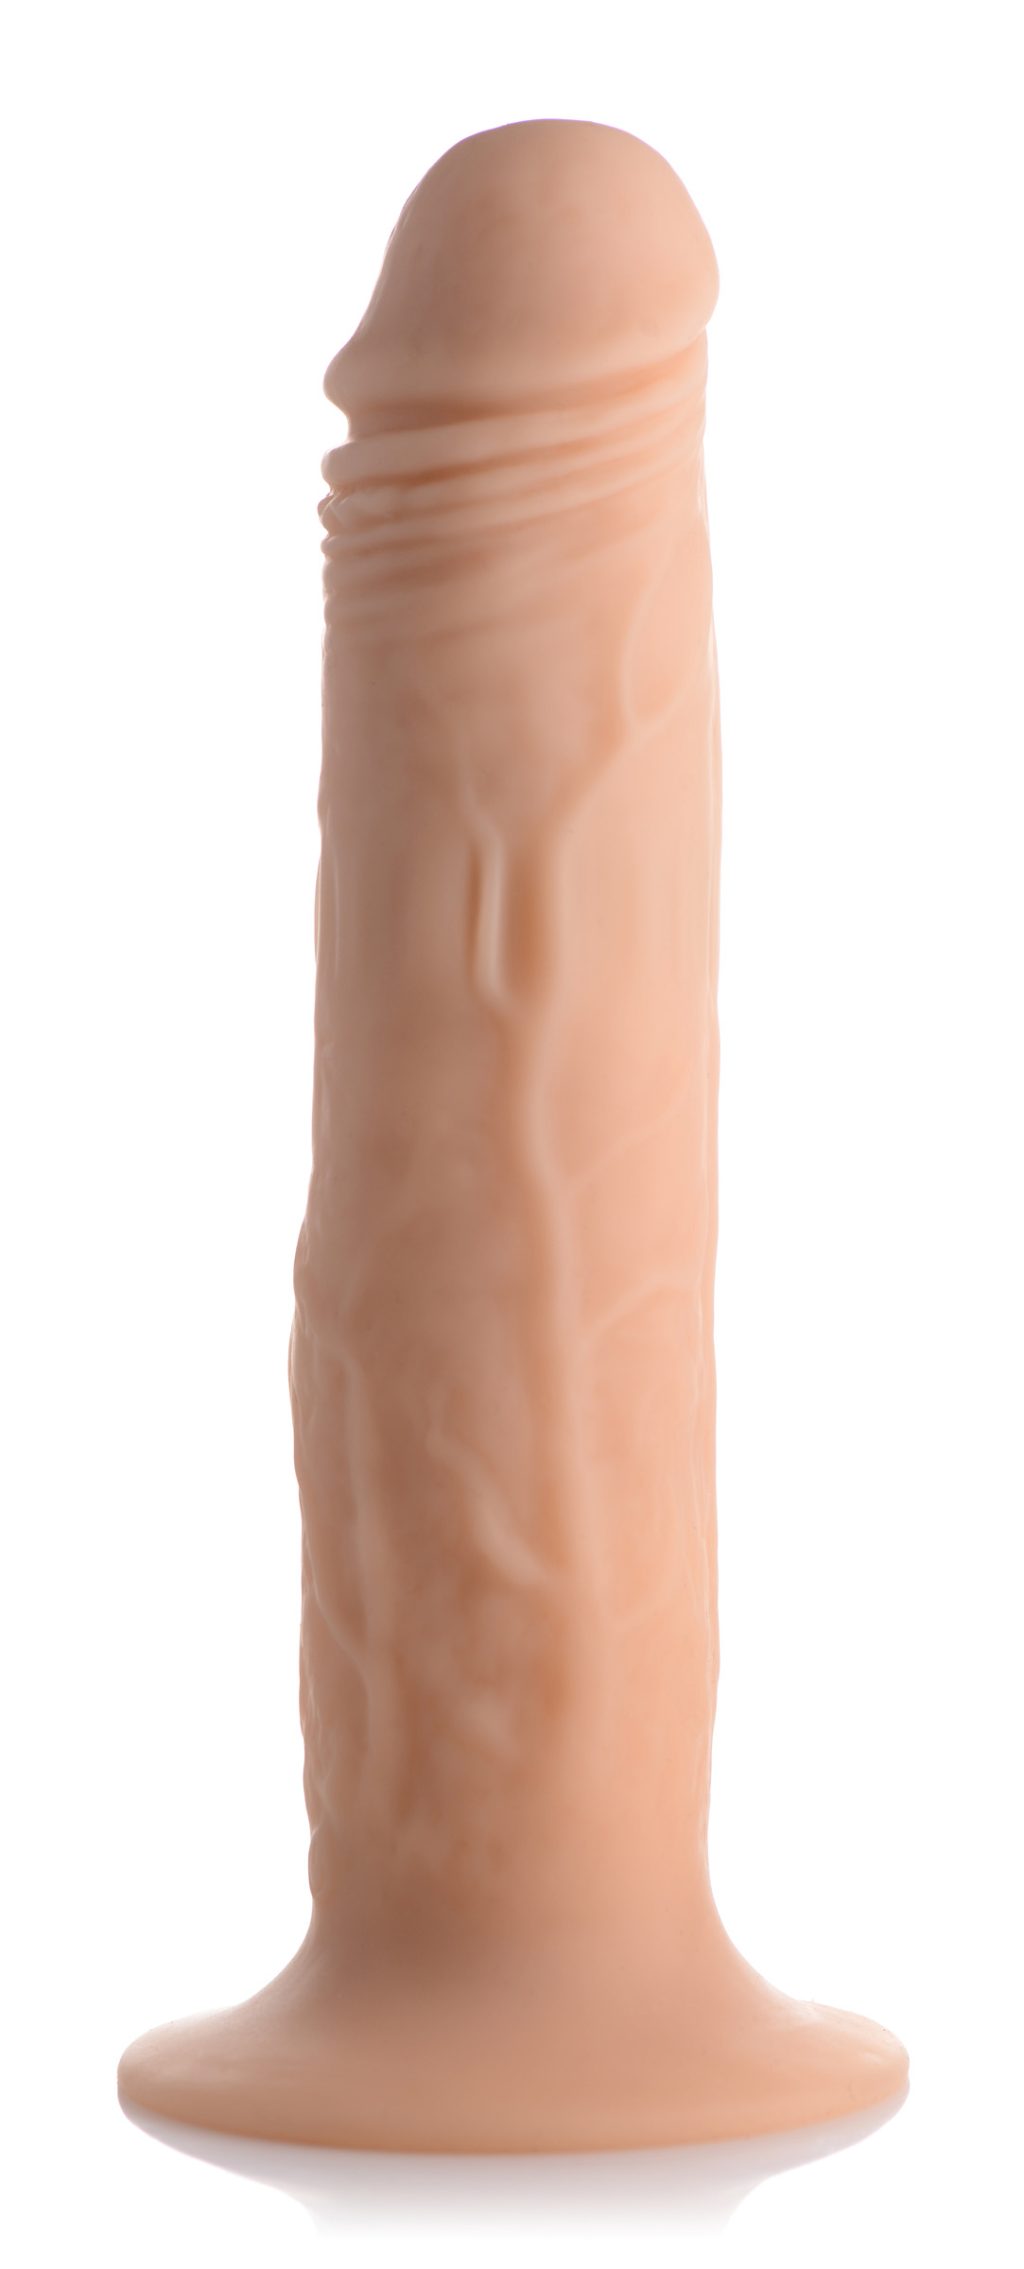 8 Inch Tapping Dildo